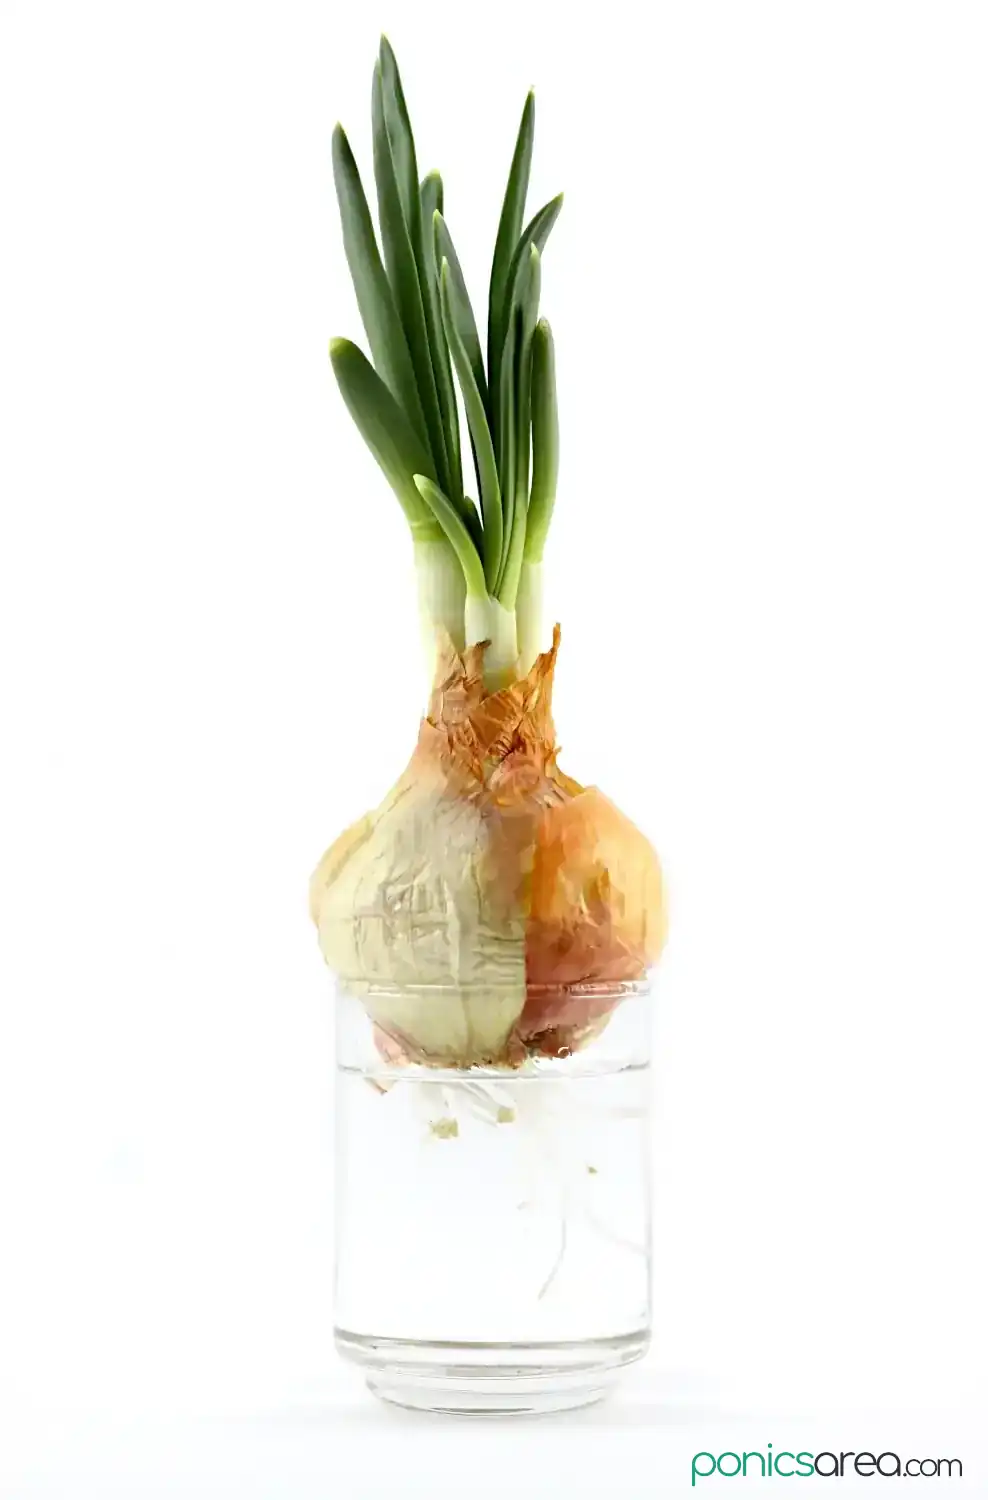 how to grow hydroponic onions